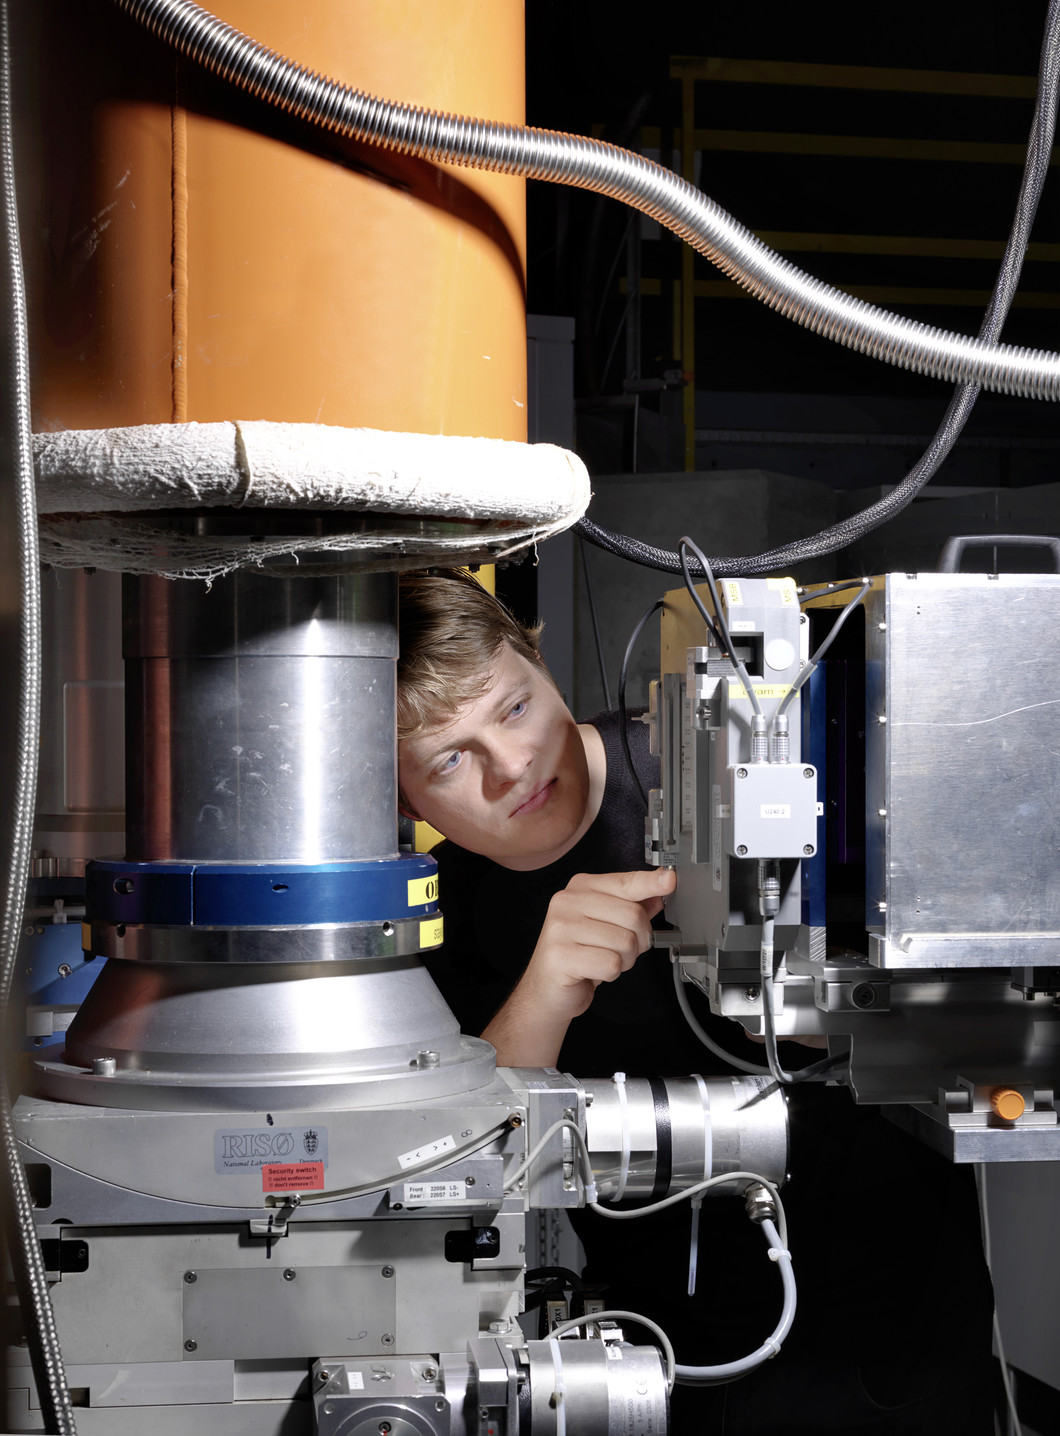 Jonathan White, first author on the paper, conducting an experiment on the neutron source SINQ at the PSI. (Photo: Scanderbeg Sauer Photography)